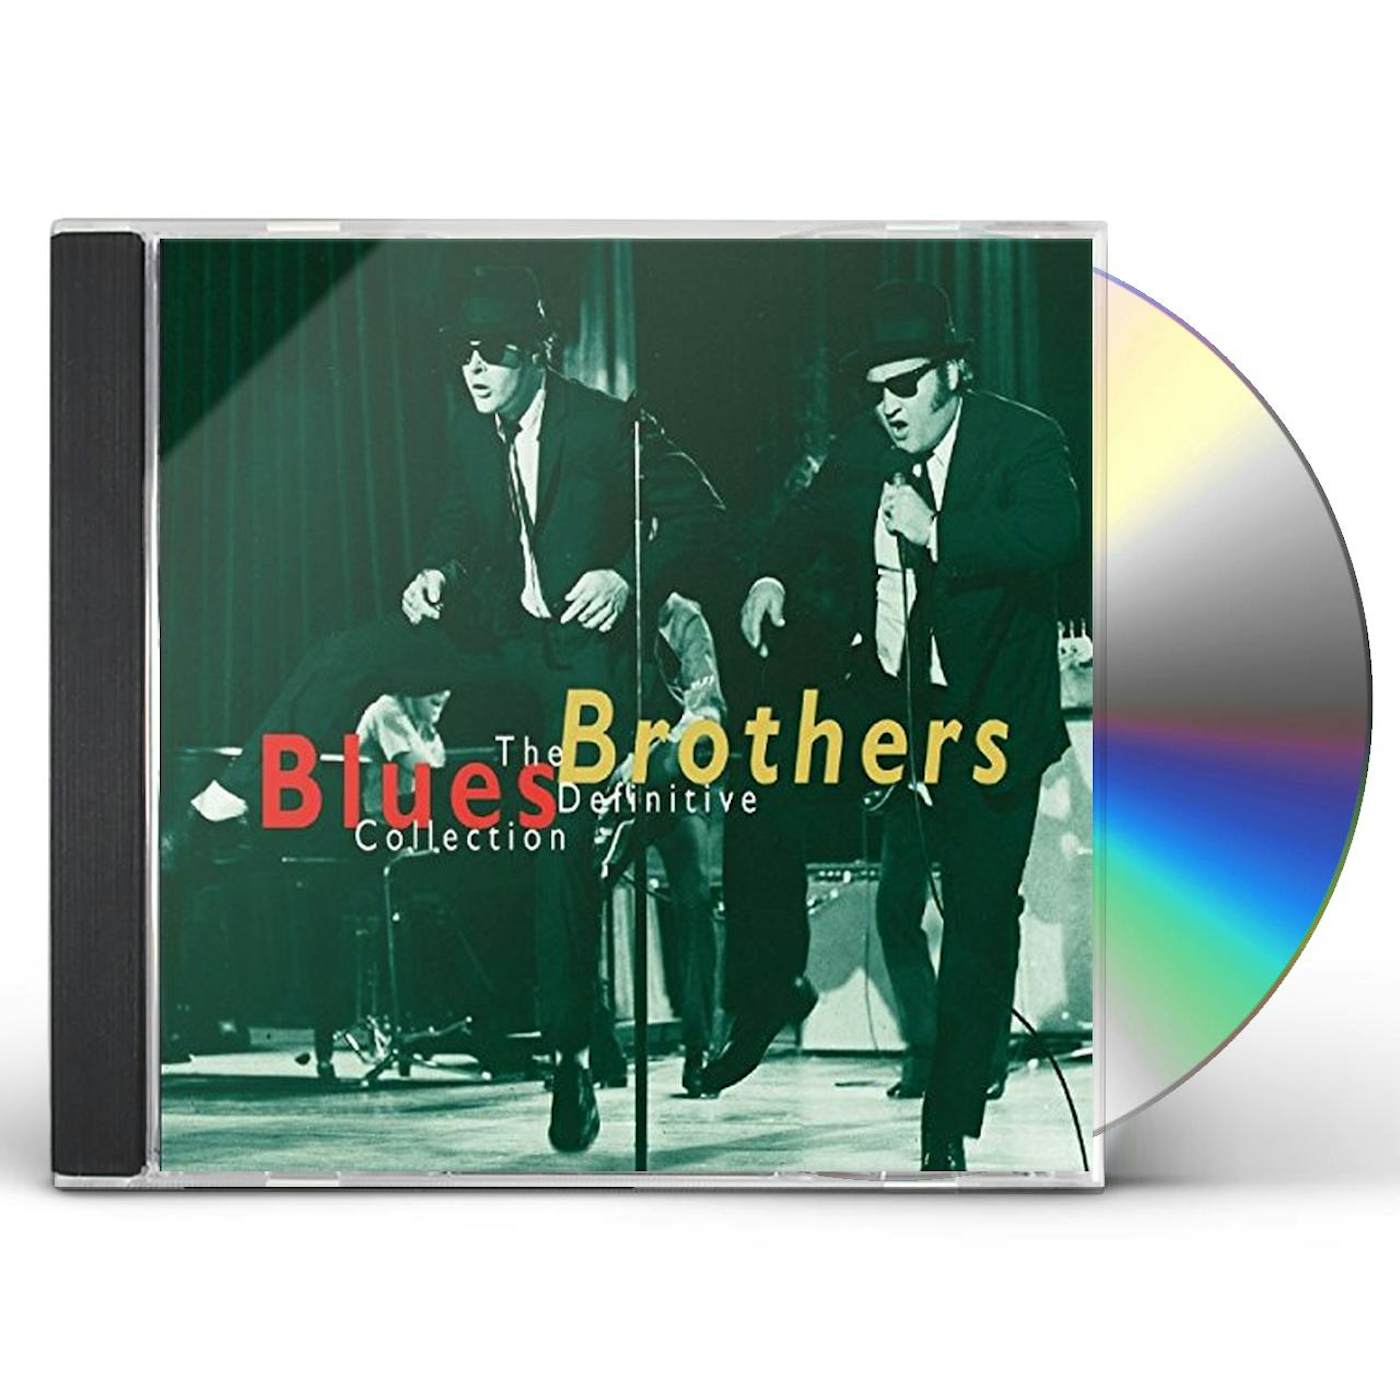 The Blues & Brothers DEFINITIVE COLLECTION CD